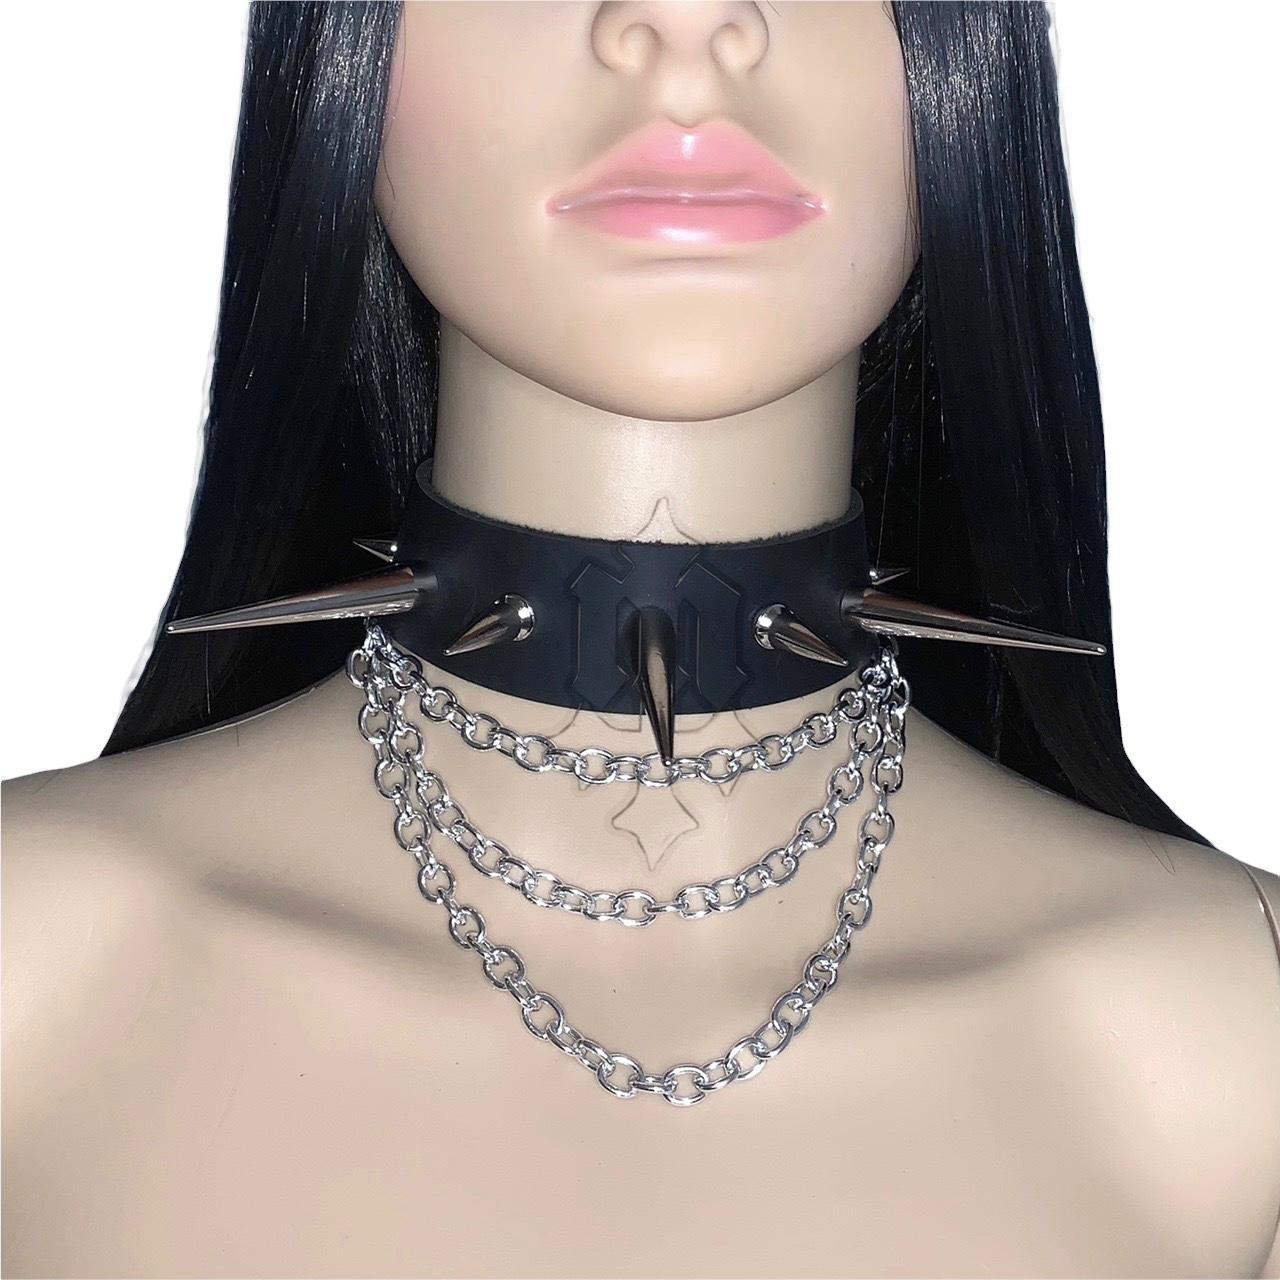 🕷 Arachne- Goth Spider Choker with Chains and Spikes - Depop